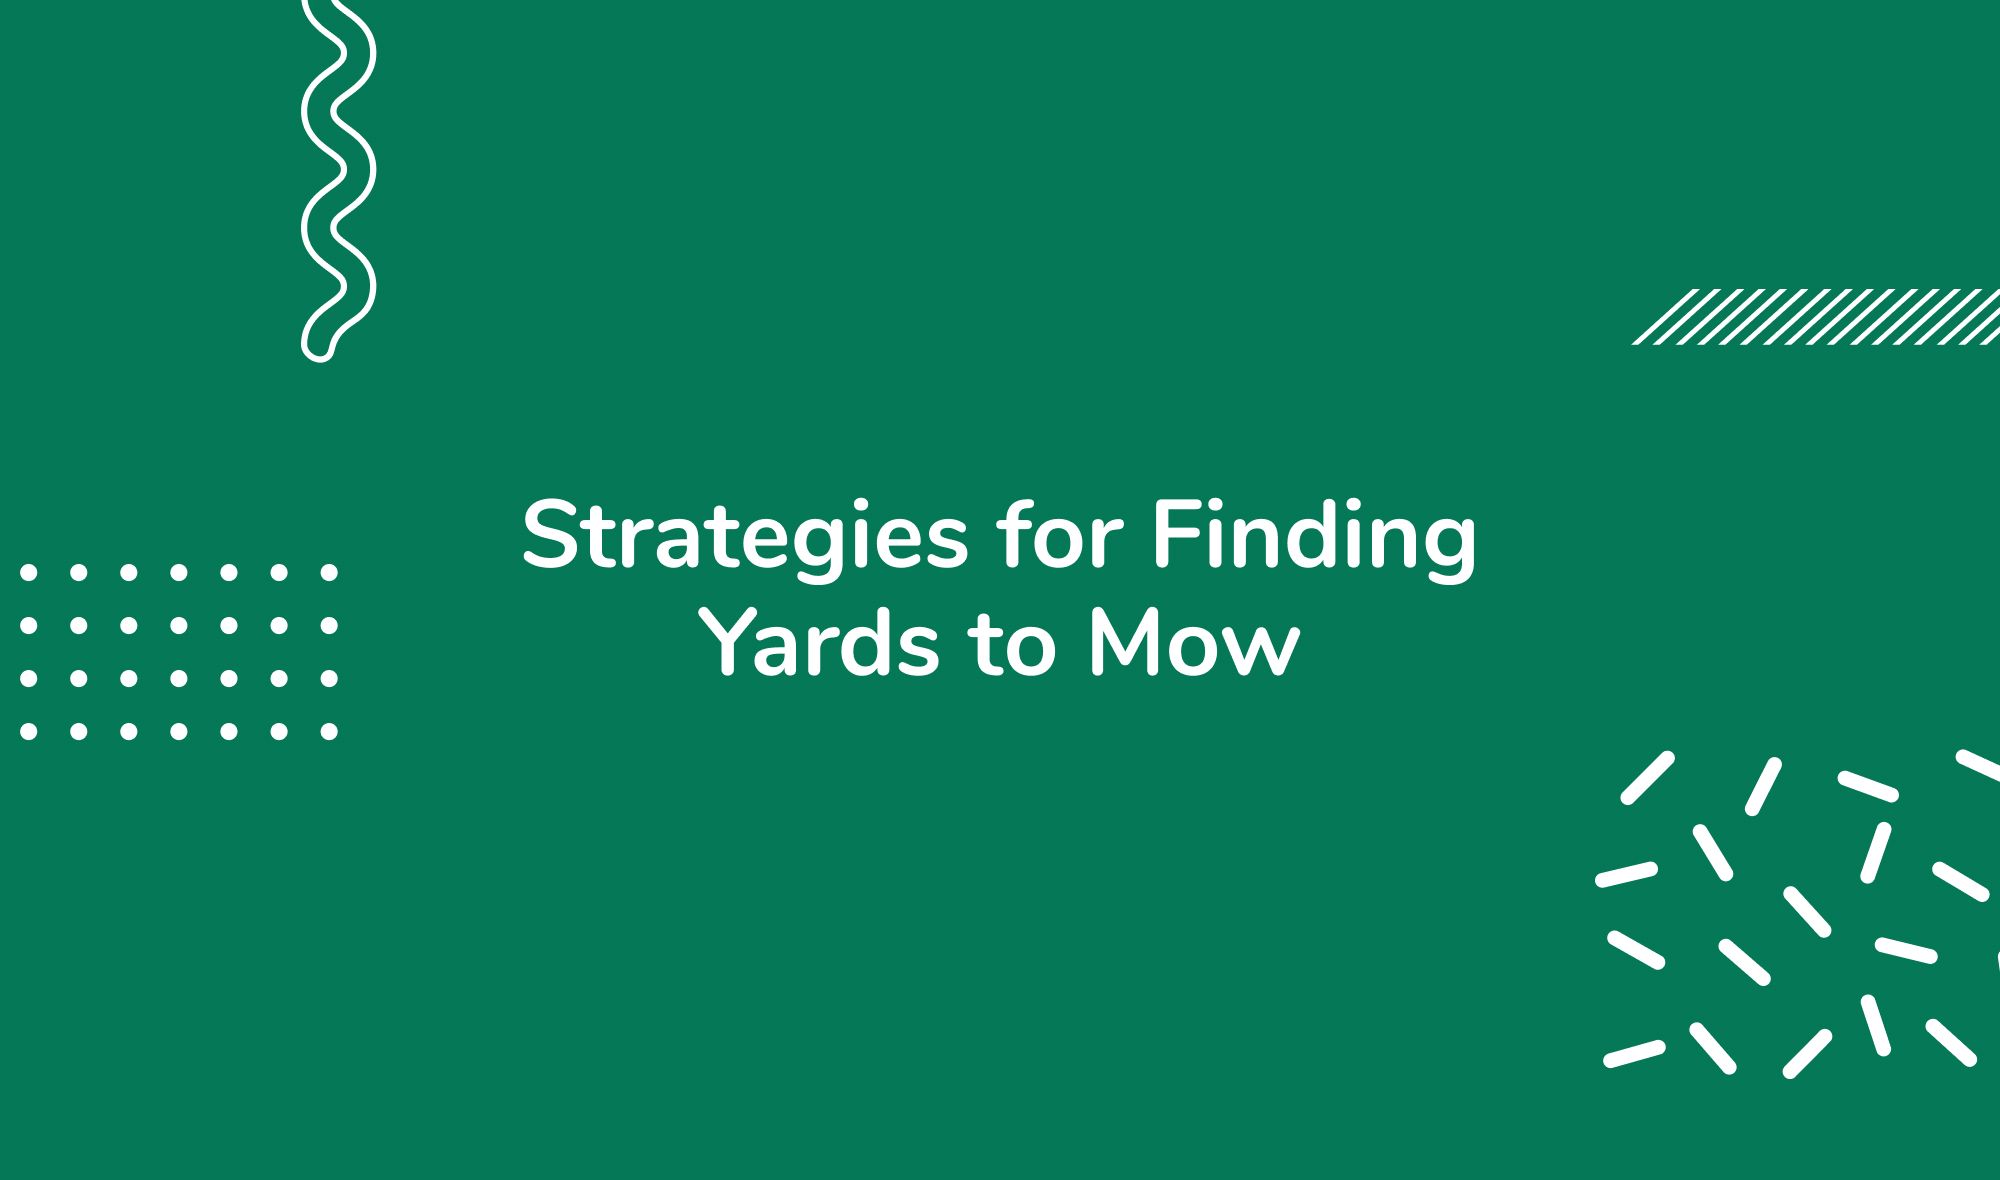 Strategies for Finding Yards to Mow